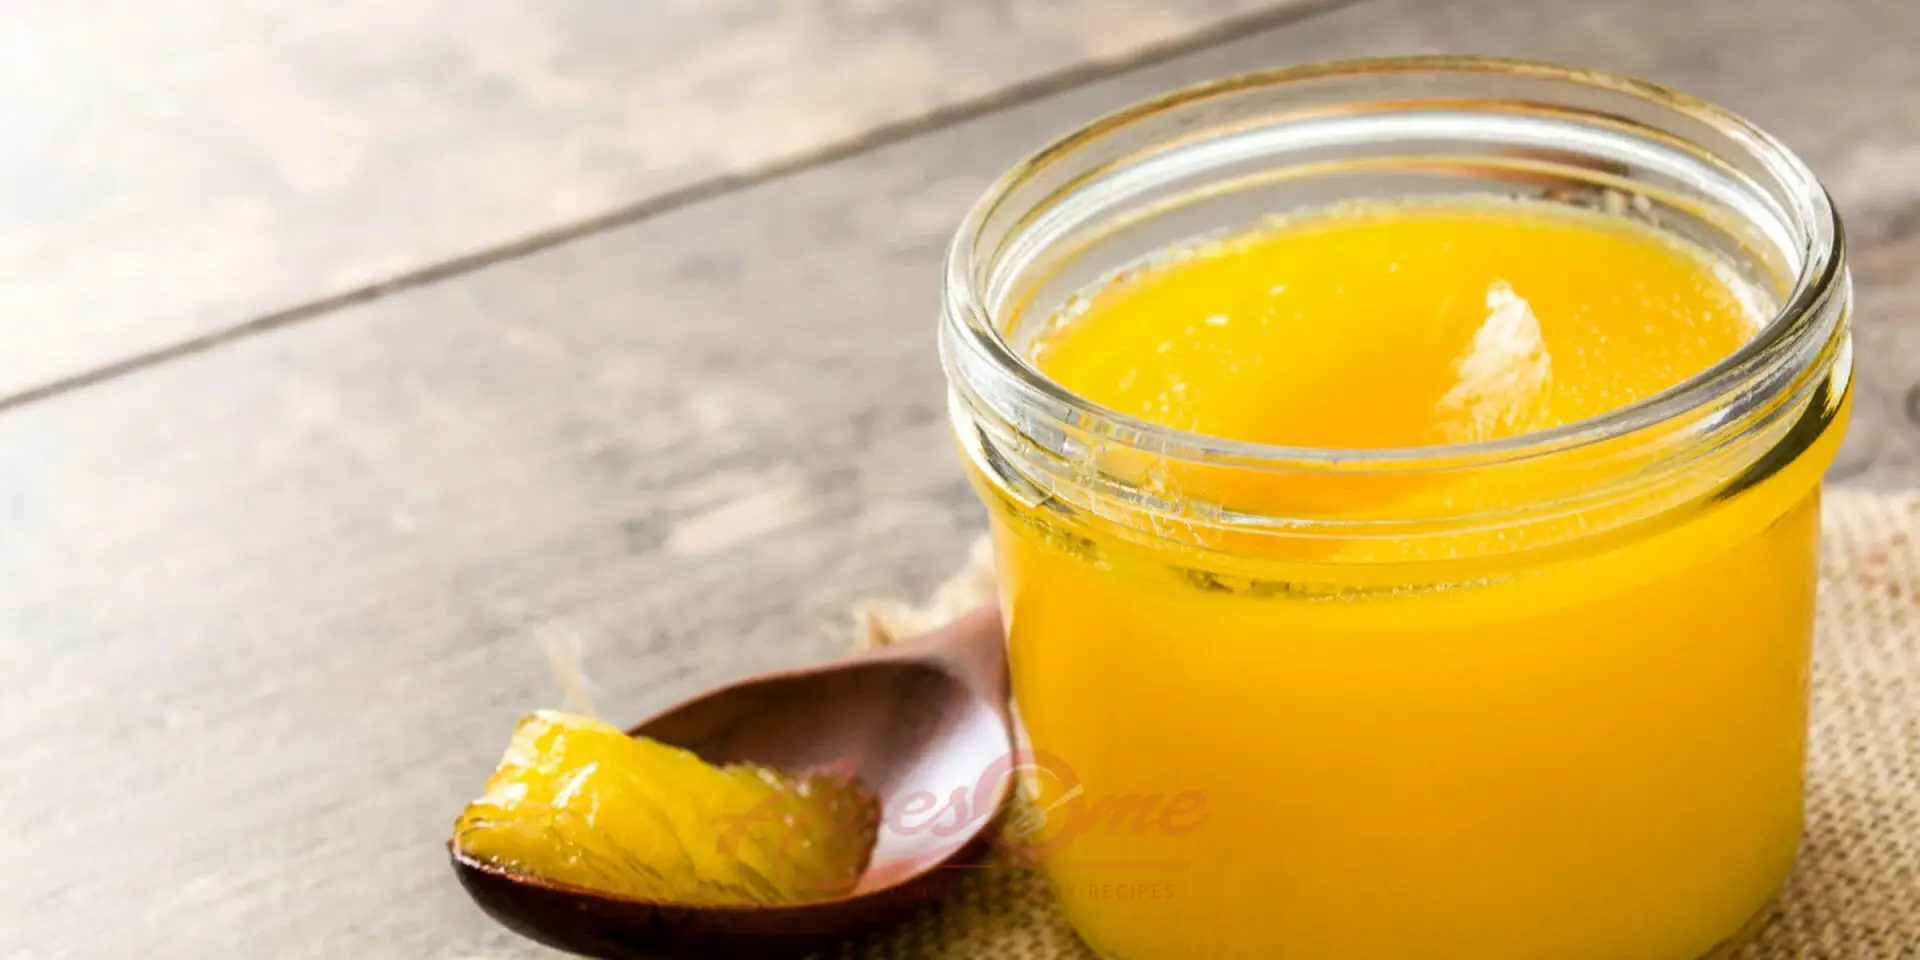 Why Ghee Is an Important Ingredient in Indian Cuisine